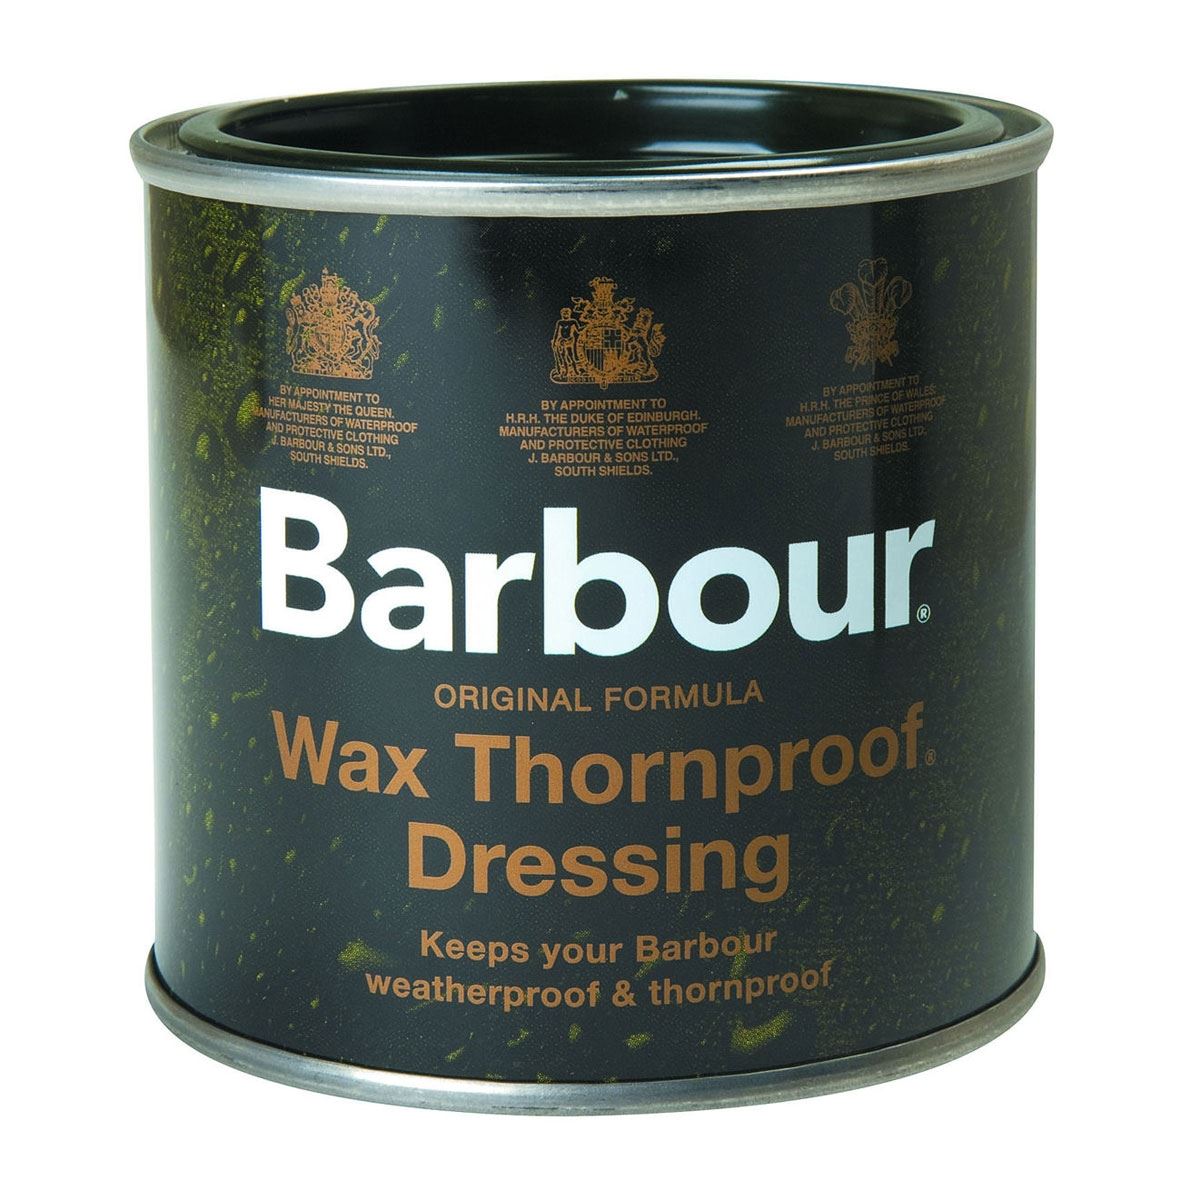 Where can I find a Barbour Wax guide for re-waxing my jacket?